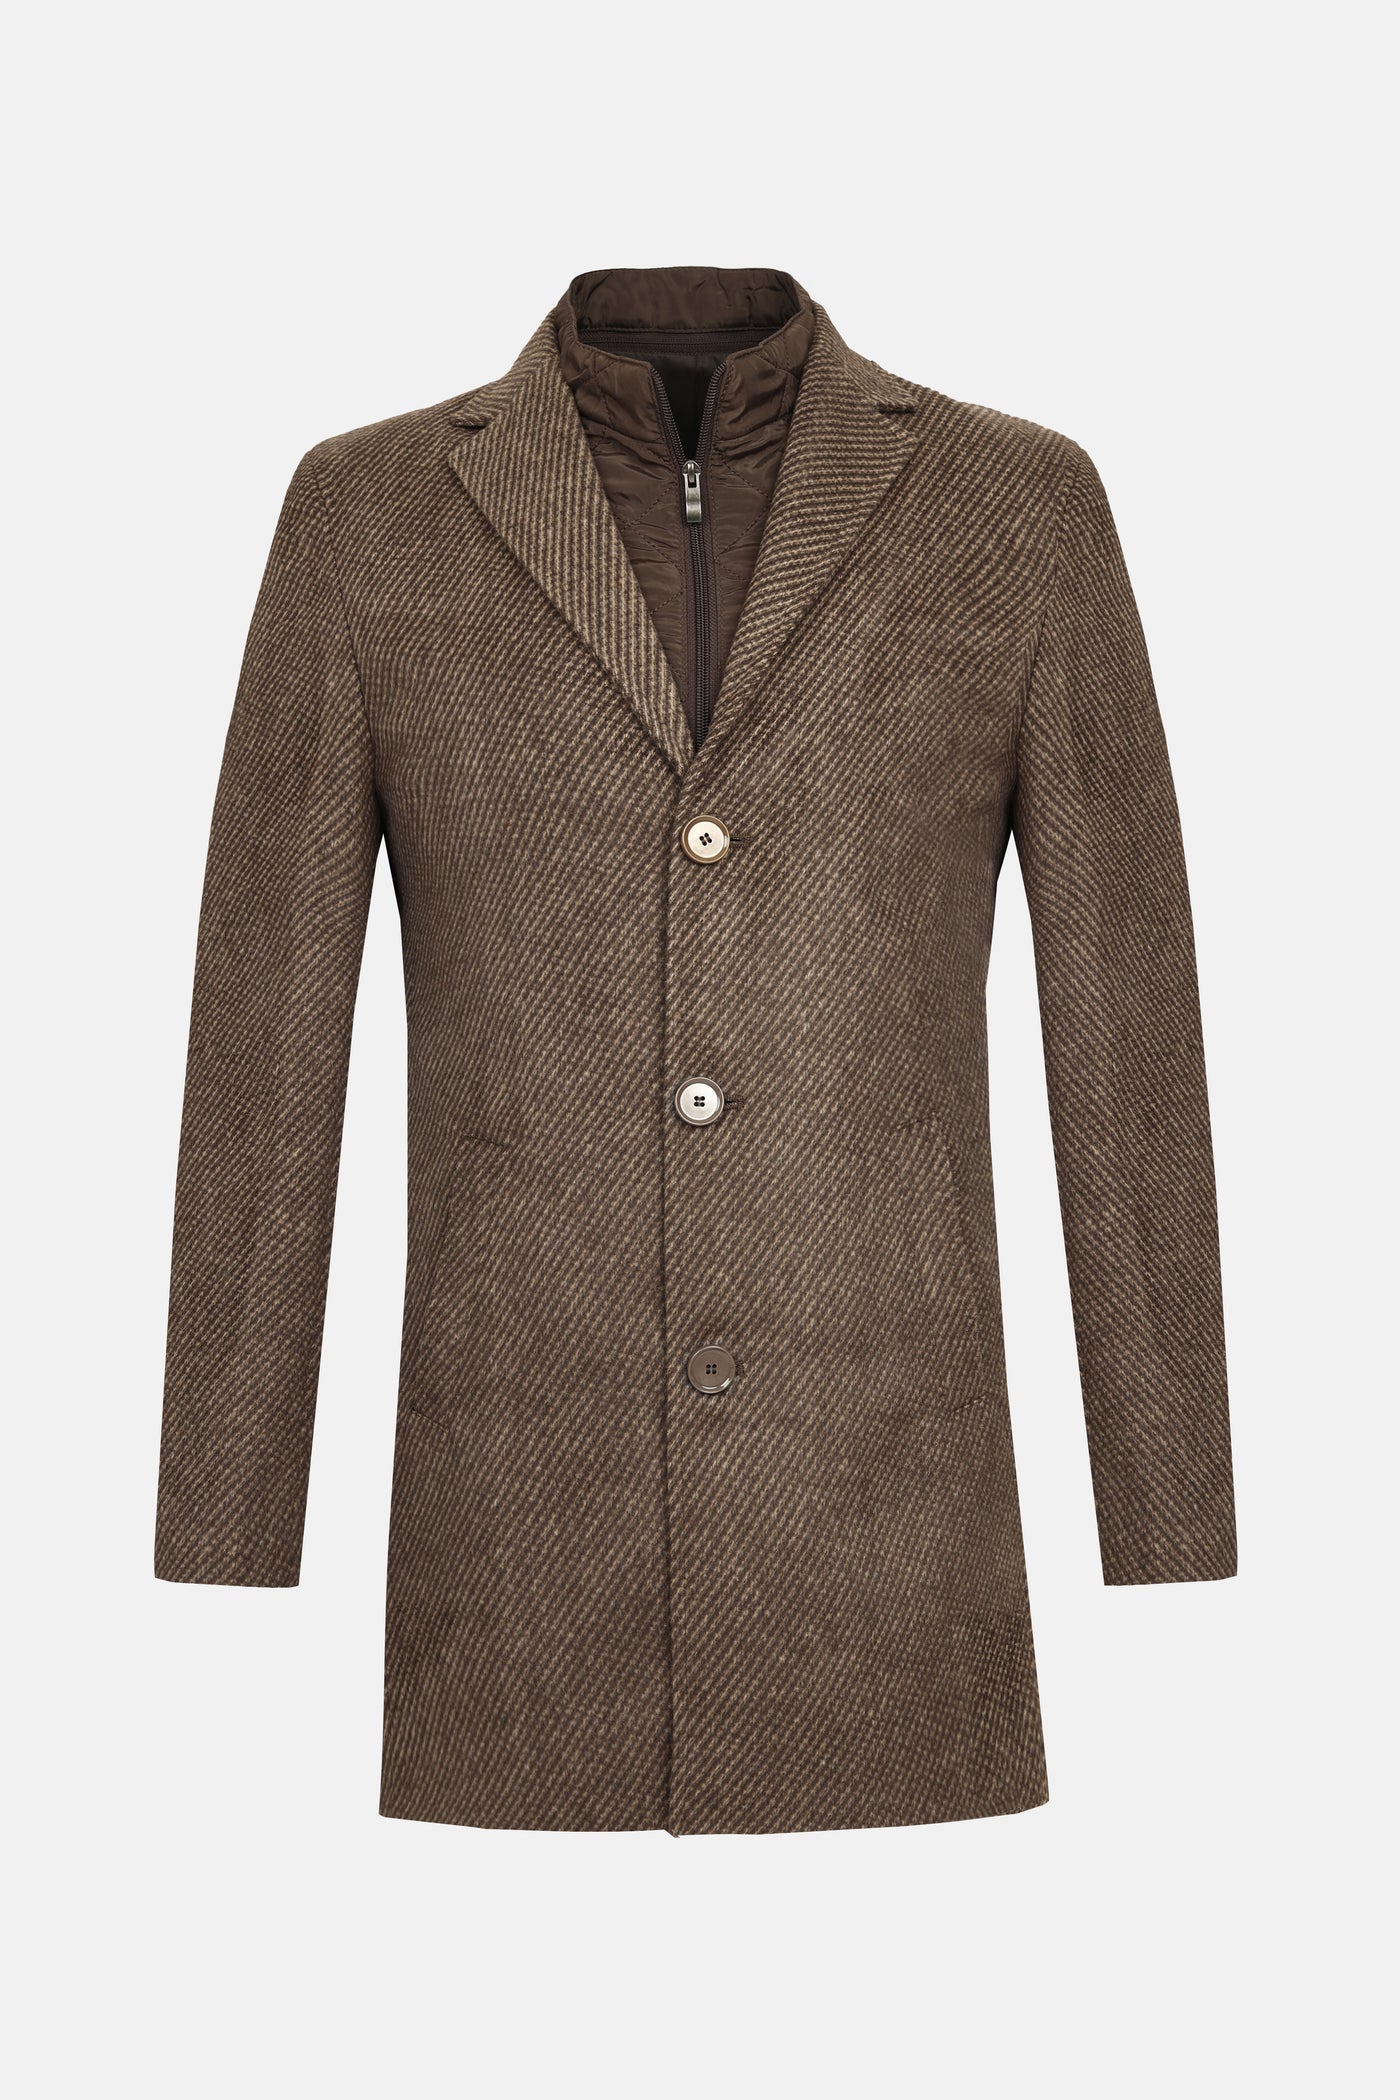 Jacquard Brown & Hazel Woven wide lapel Coat with removable padded piece